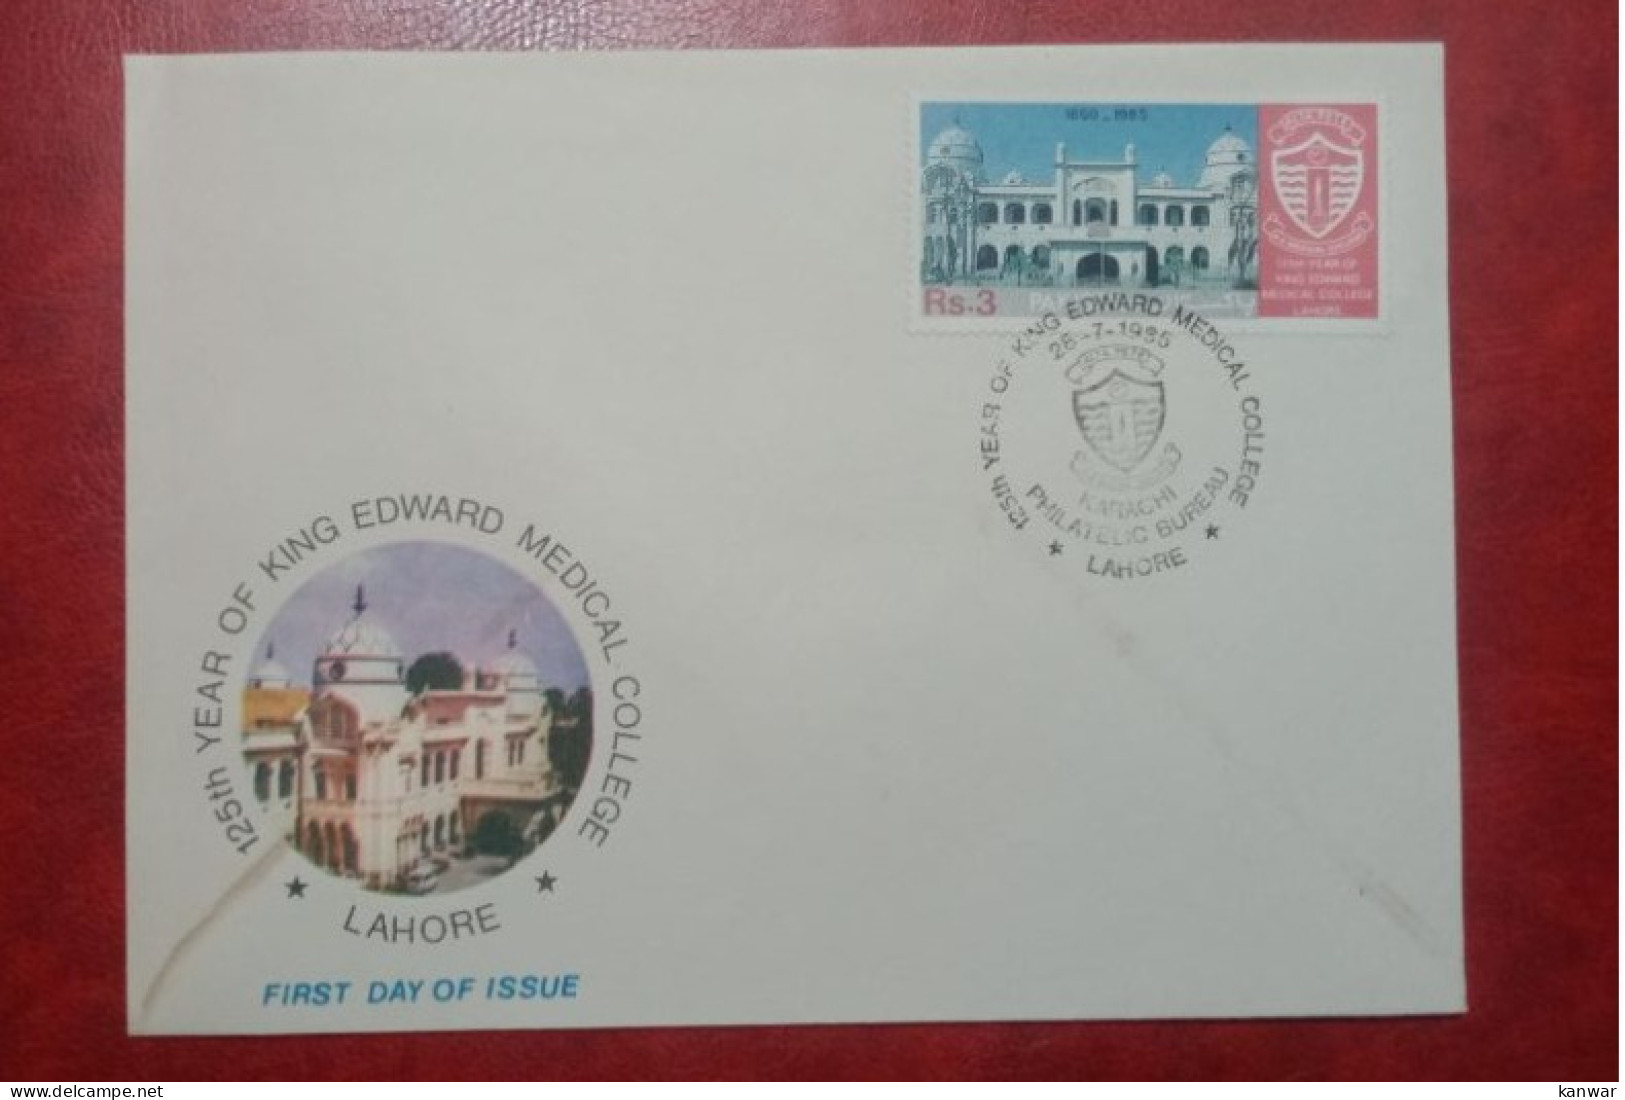 1985 PAKISTAN FDC COVER WITH STAMP 125TH YEARS OF KING ADWERD MEDICAL COLLEGE - Pakistan